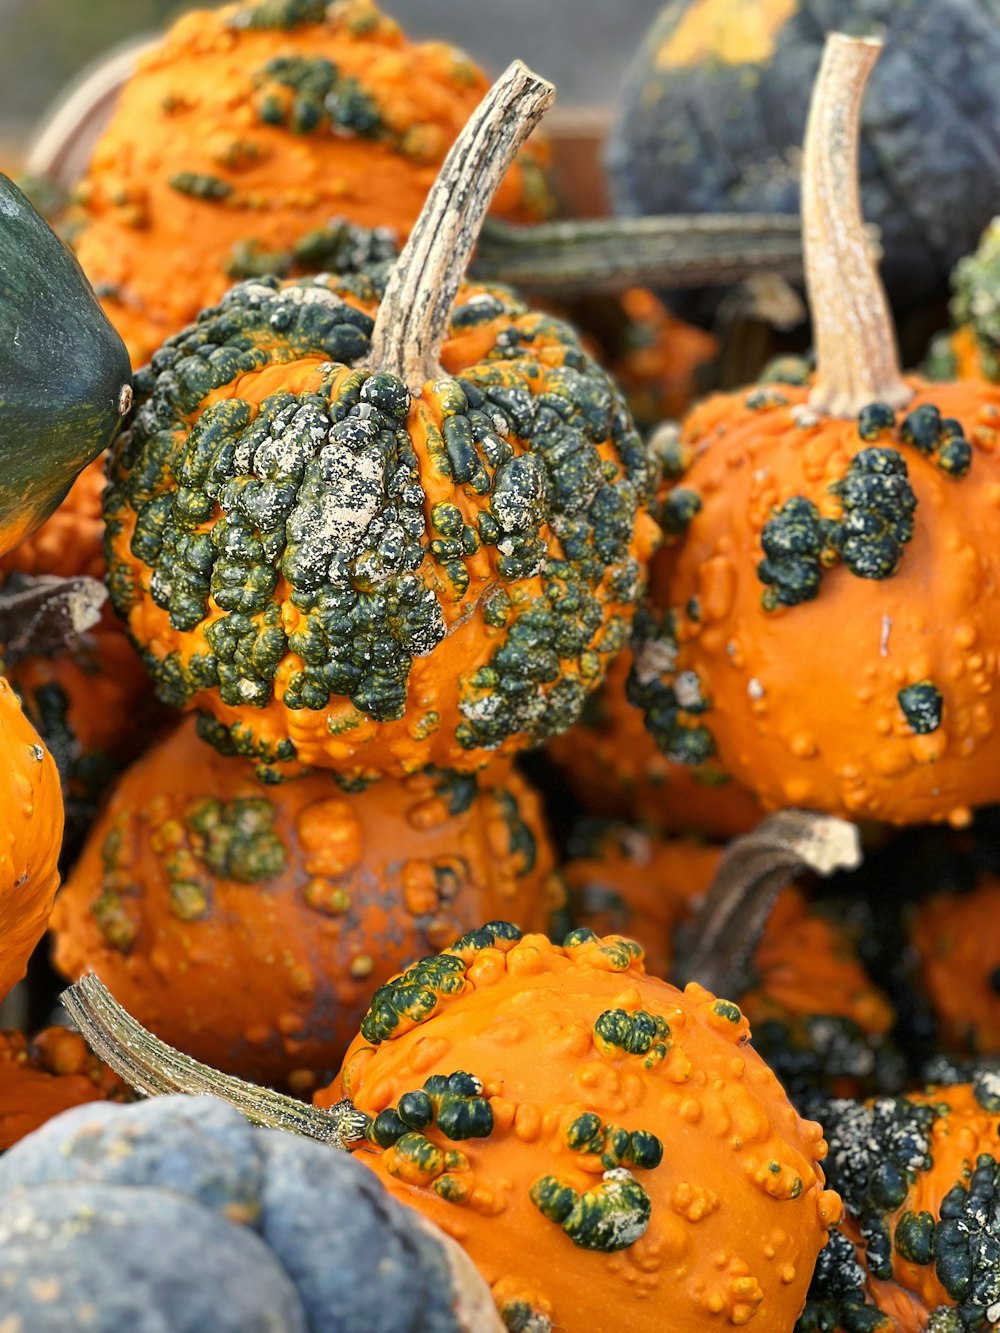 a pile of pumpkins with green and yellow decorations